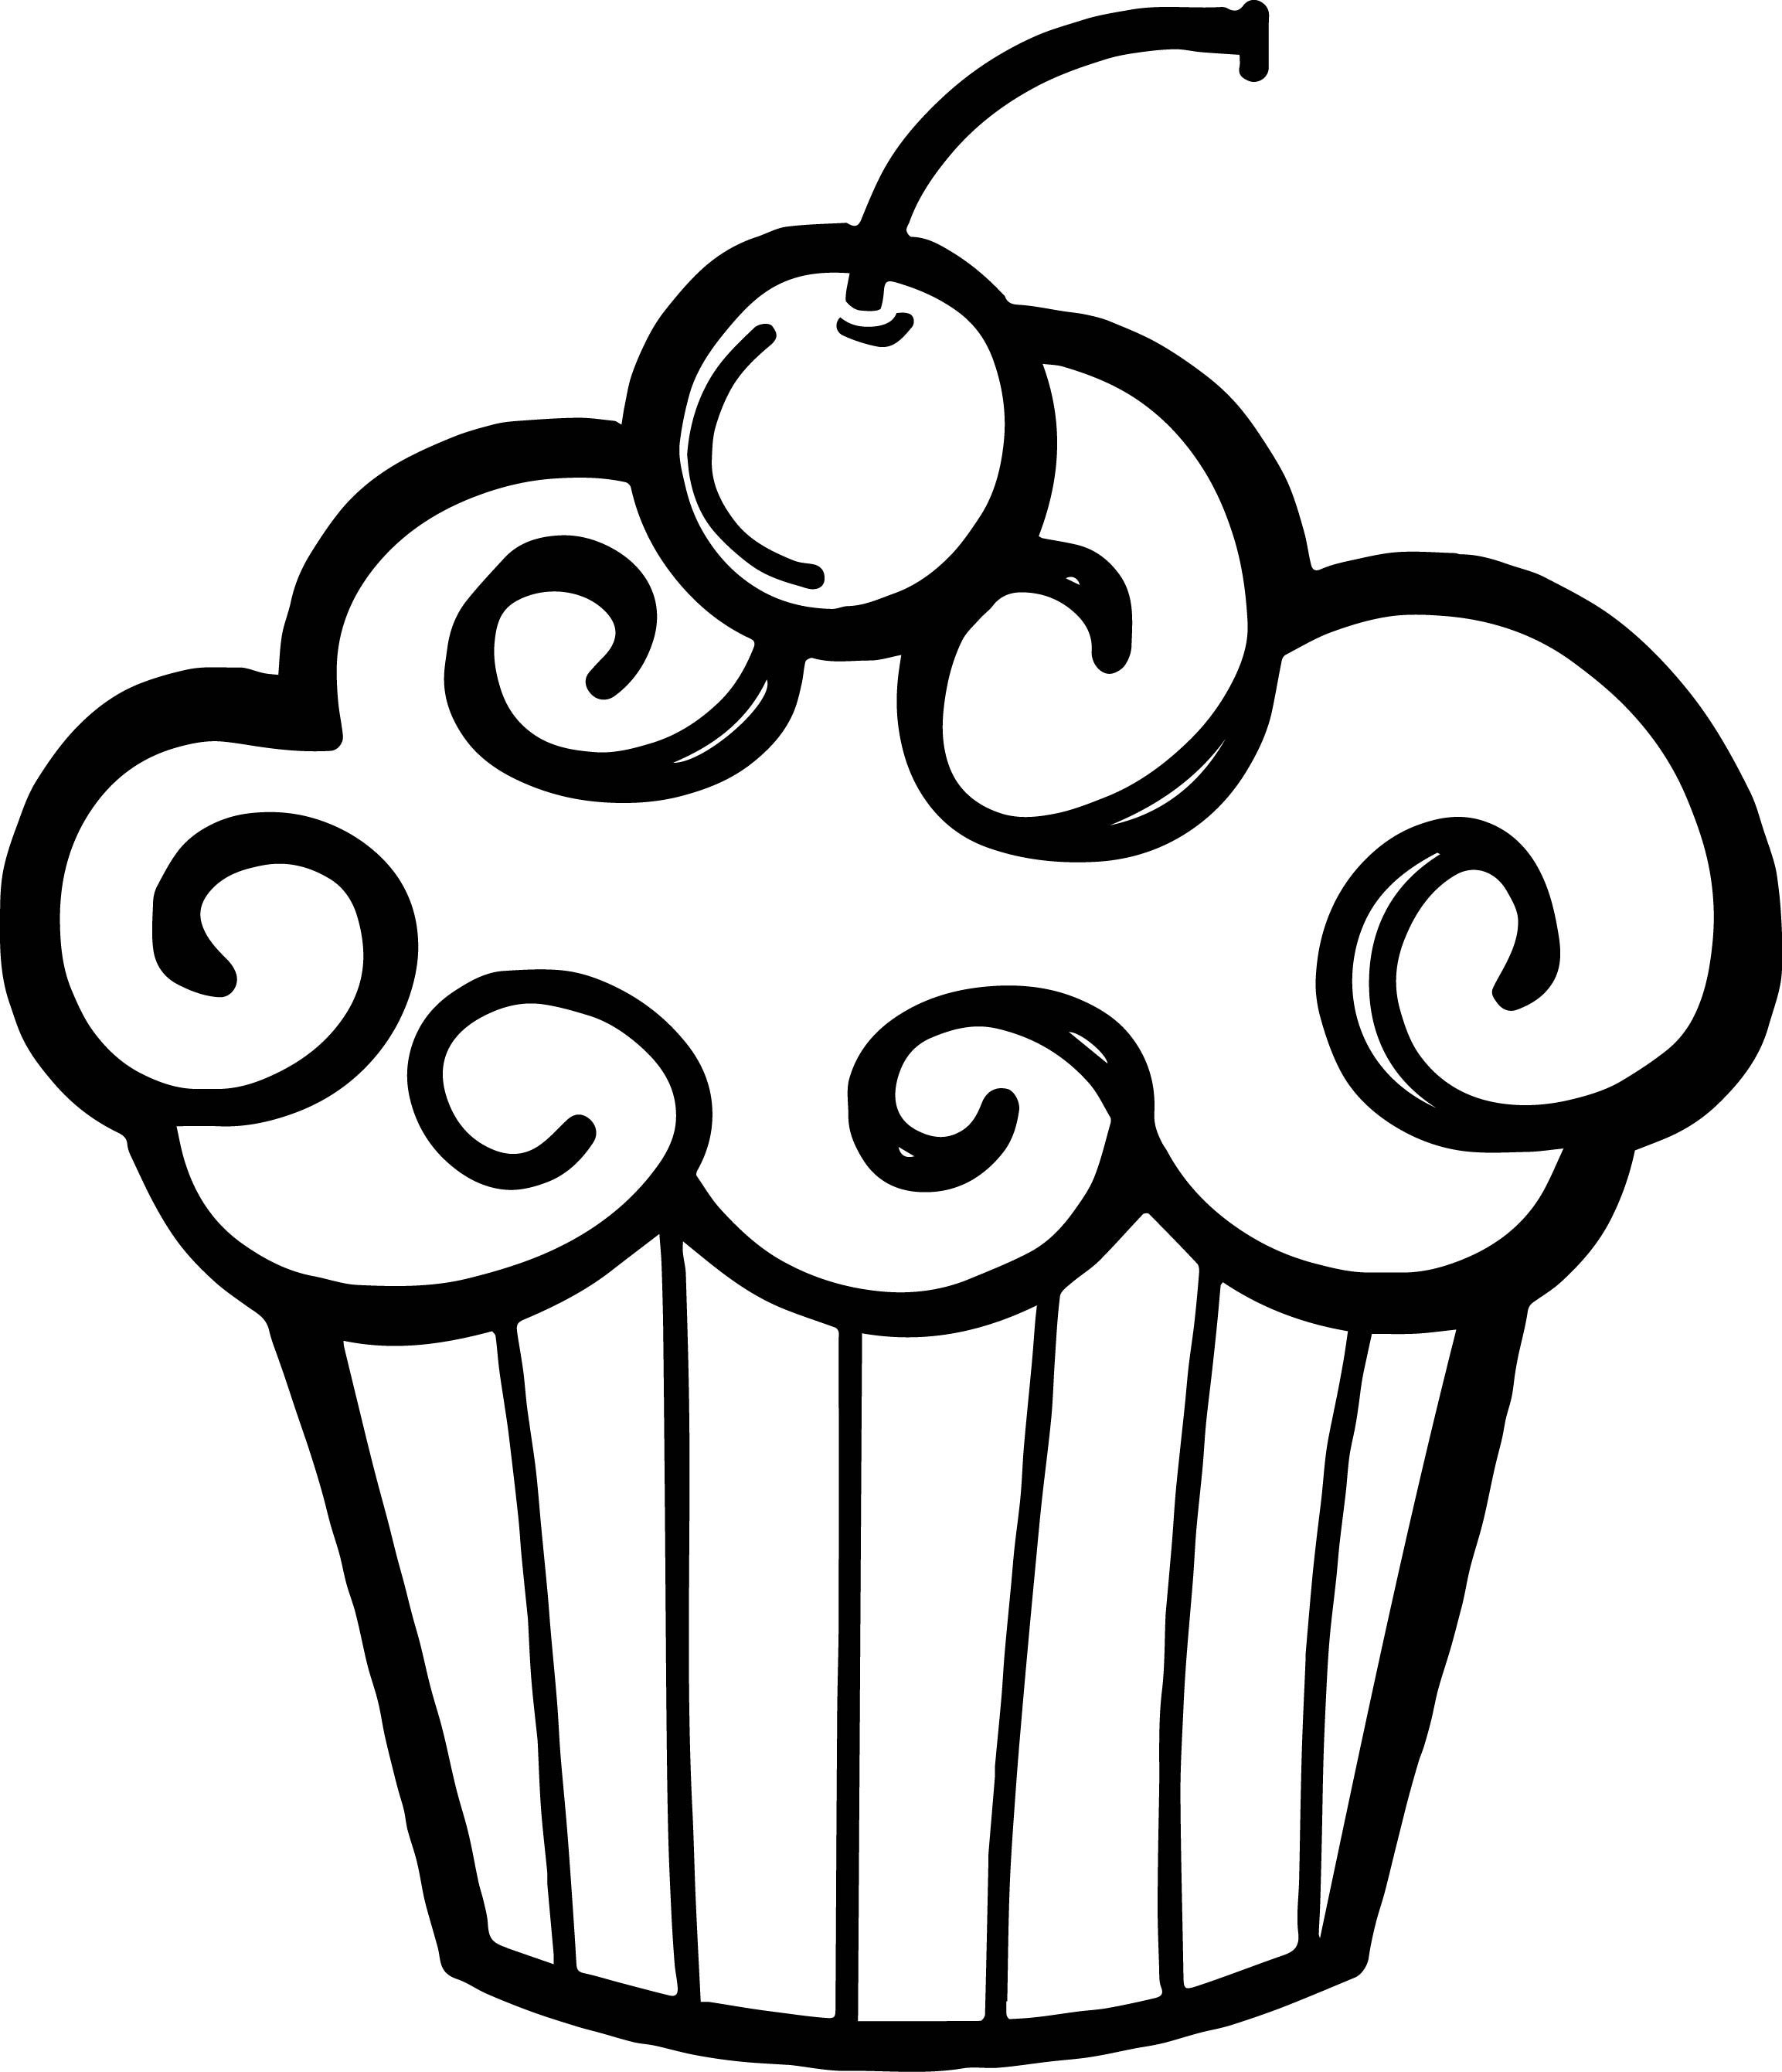 Cupcake Clipart Black And White - 45 cliparts